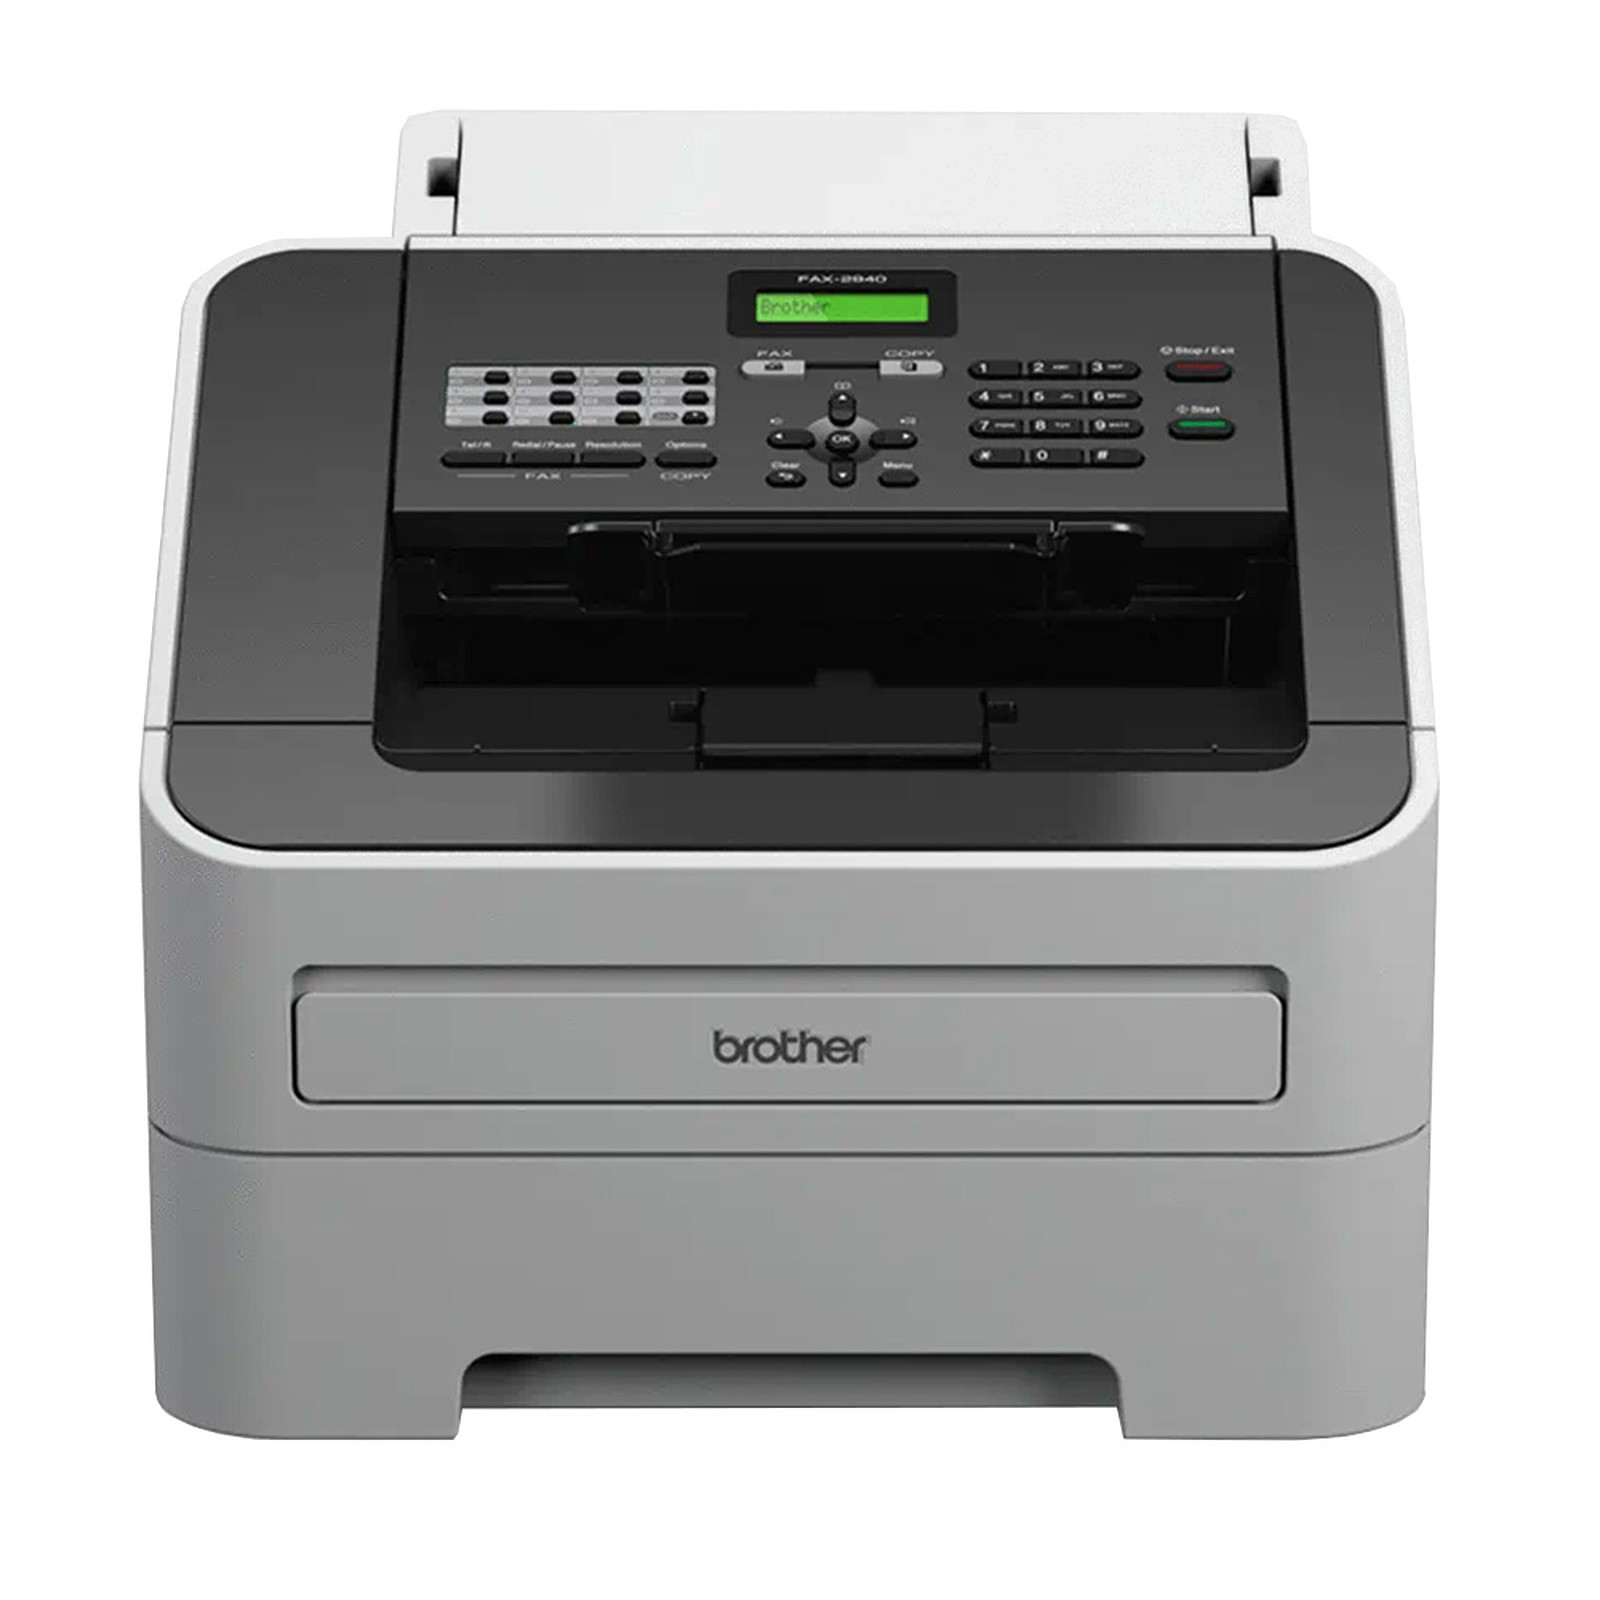 Brother FAX-2940 - Telephone FAX Brother